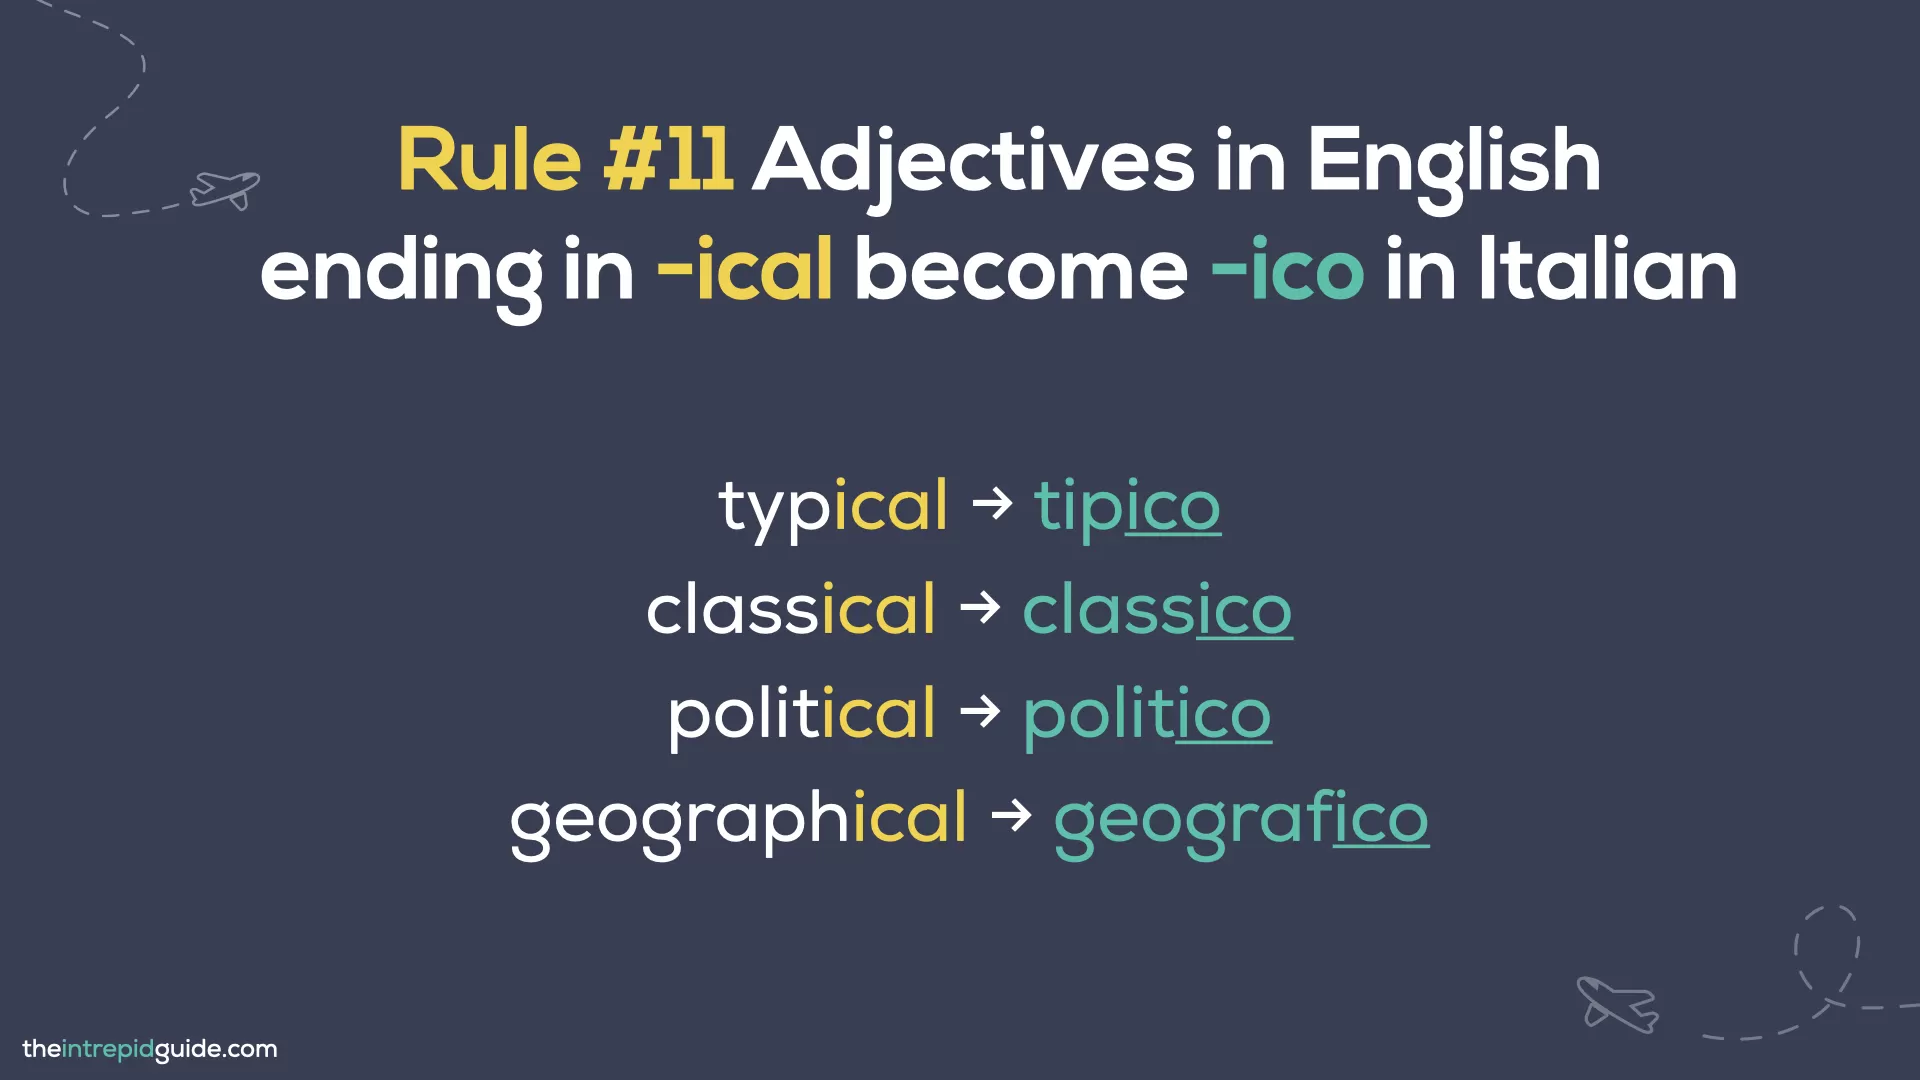 Italian cognates and loan words - Rule 11 - Adjectives in English ending in -ical become -ico in Italian